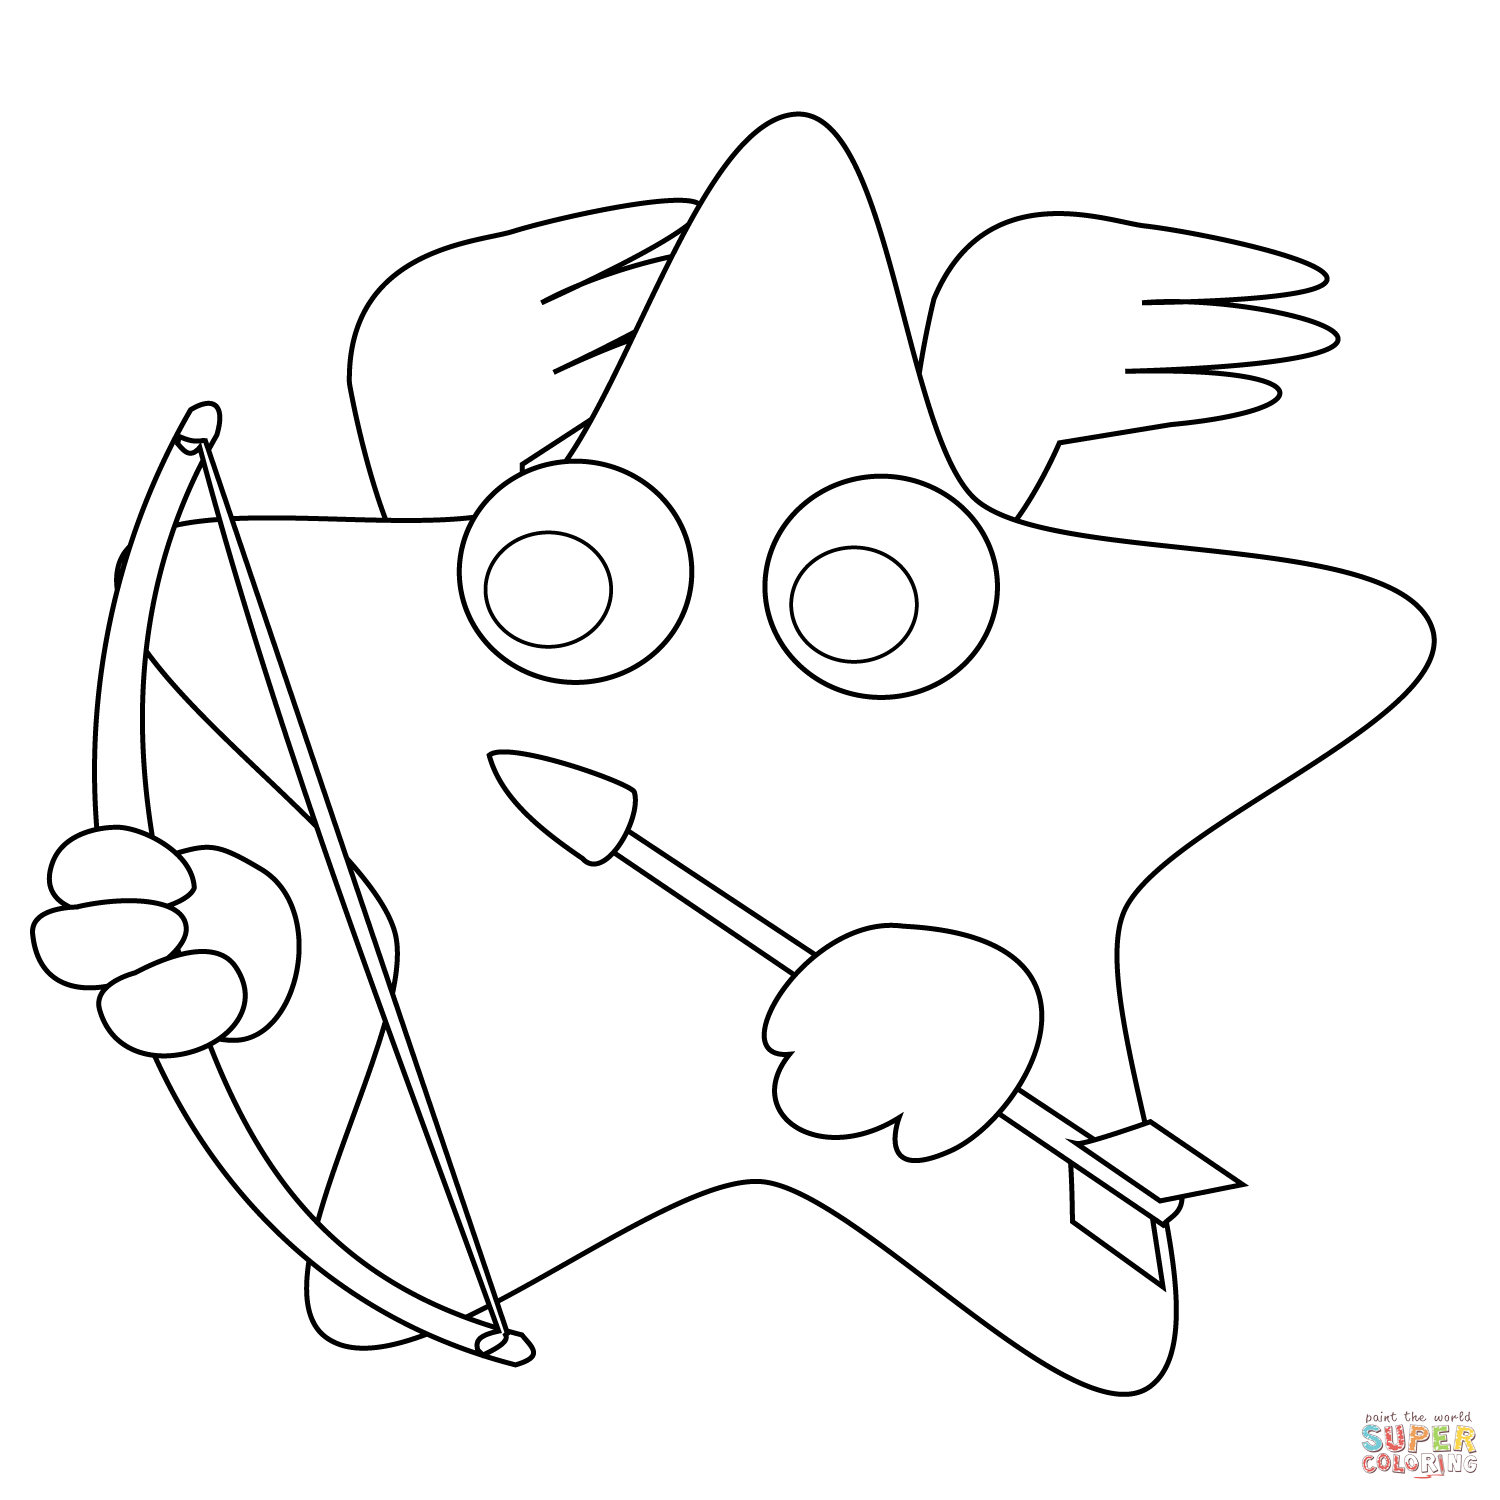 Star coloring pages | Free Printable Pictures